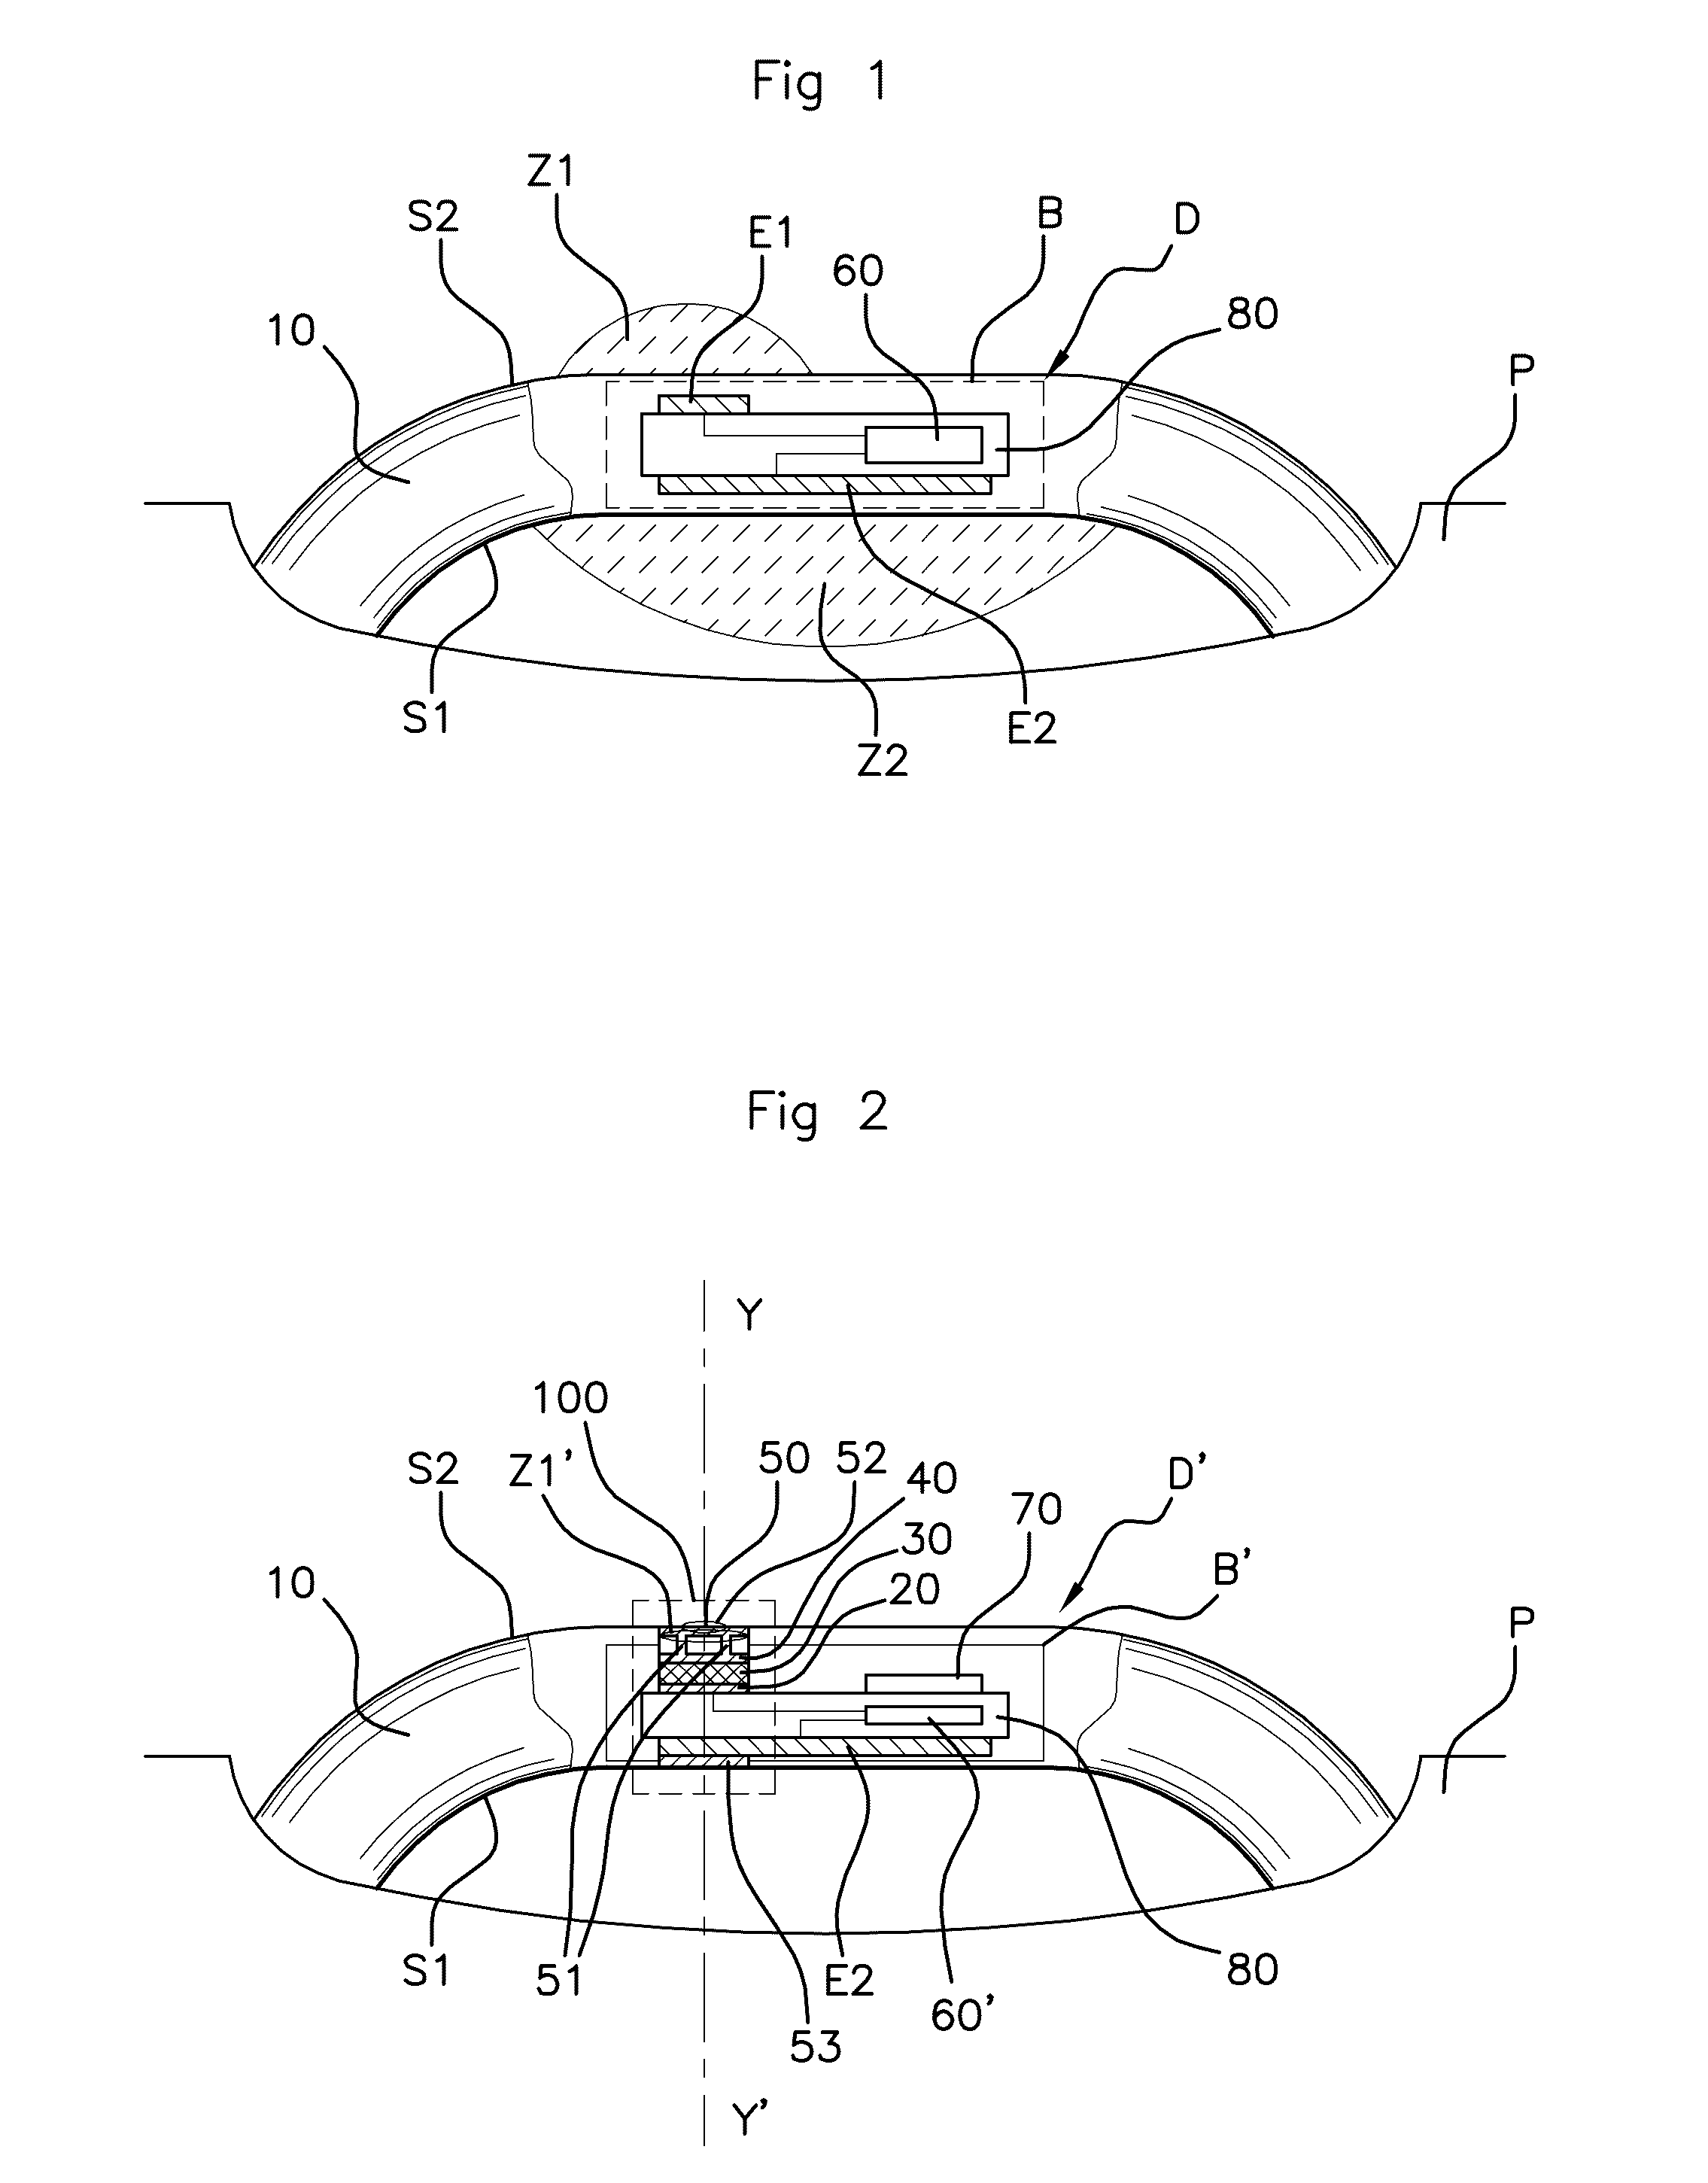 Device for detecting a user's intention to lock or unlock a motor vehicle door